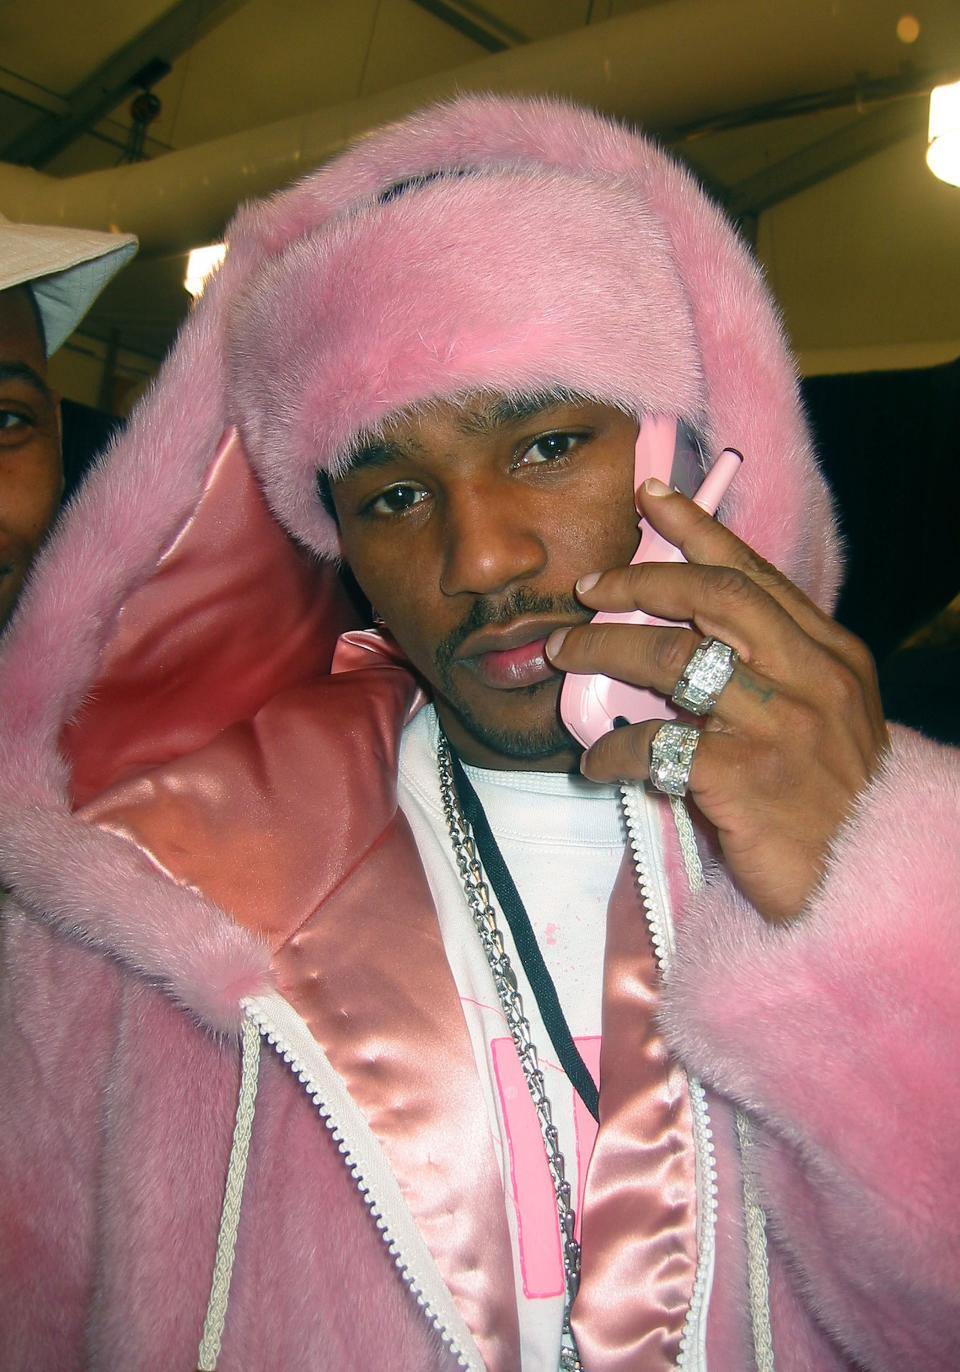 Baby Phat phone cases were all the rage in the early 2000s. Cam'ron famously wore a pink, embellished phone with a matching fur hoodie to the brand's Fall 2003 show. His look is now considered iconic, inspiring countless Halloween costumes and even one of North West's most recent outfits.